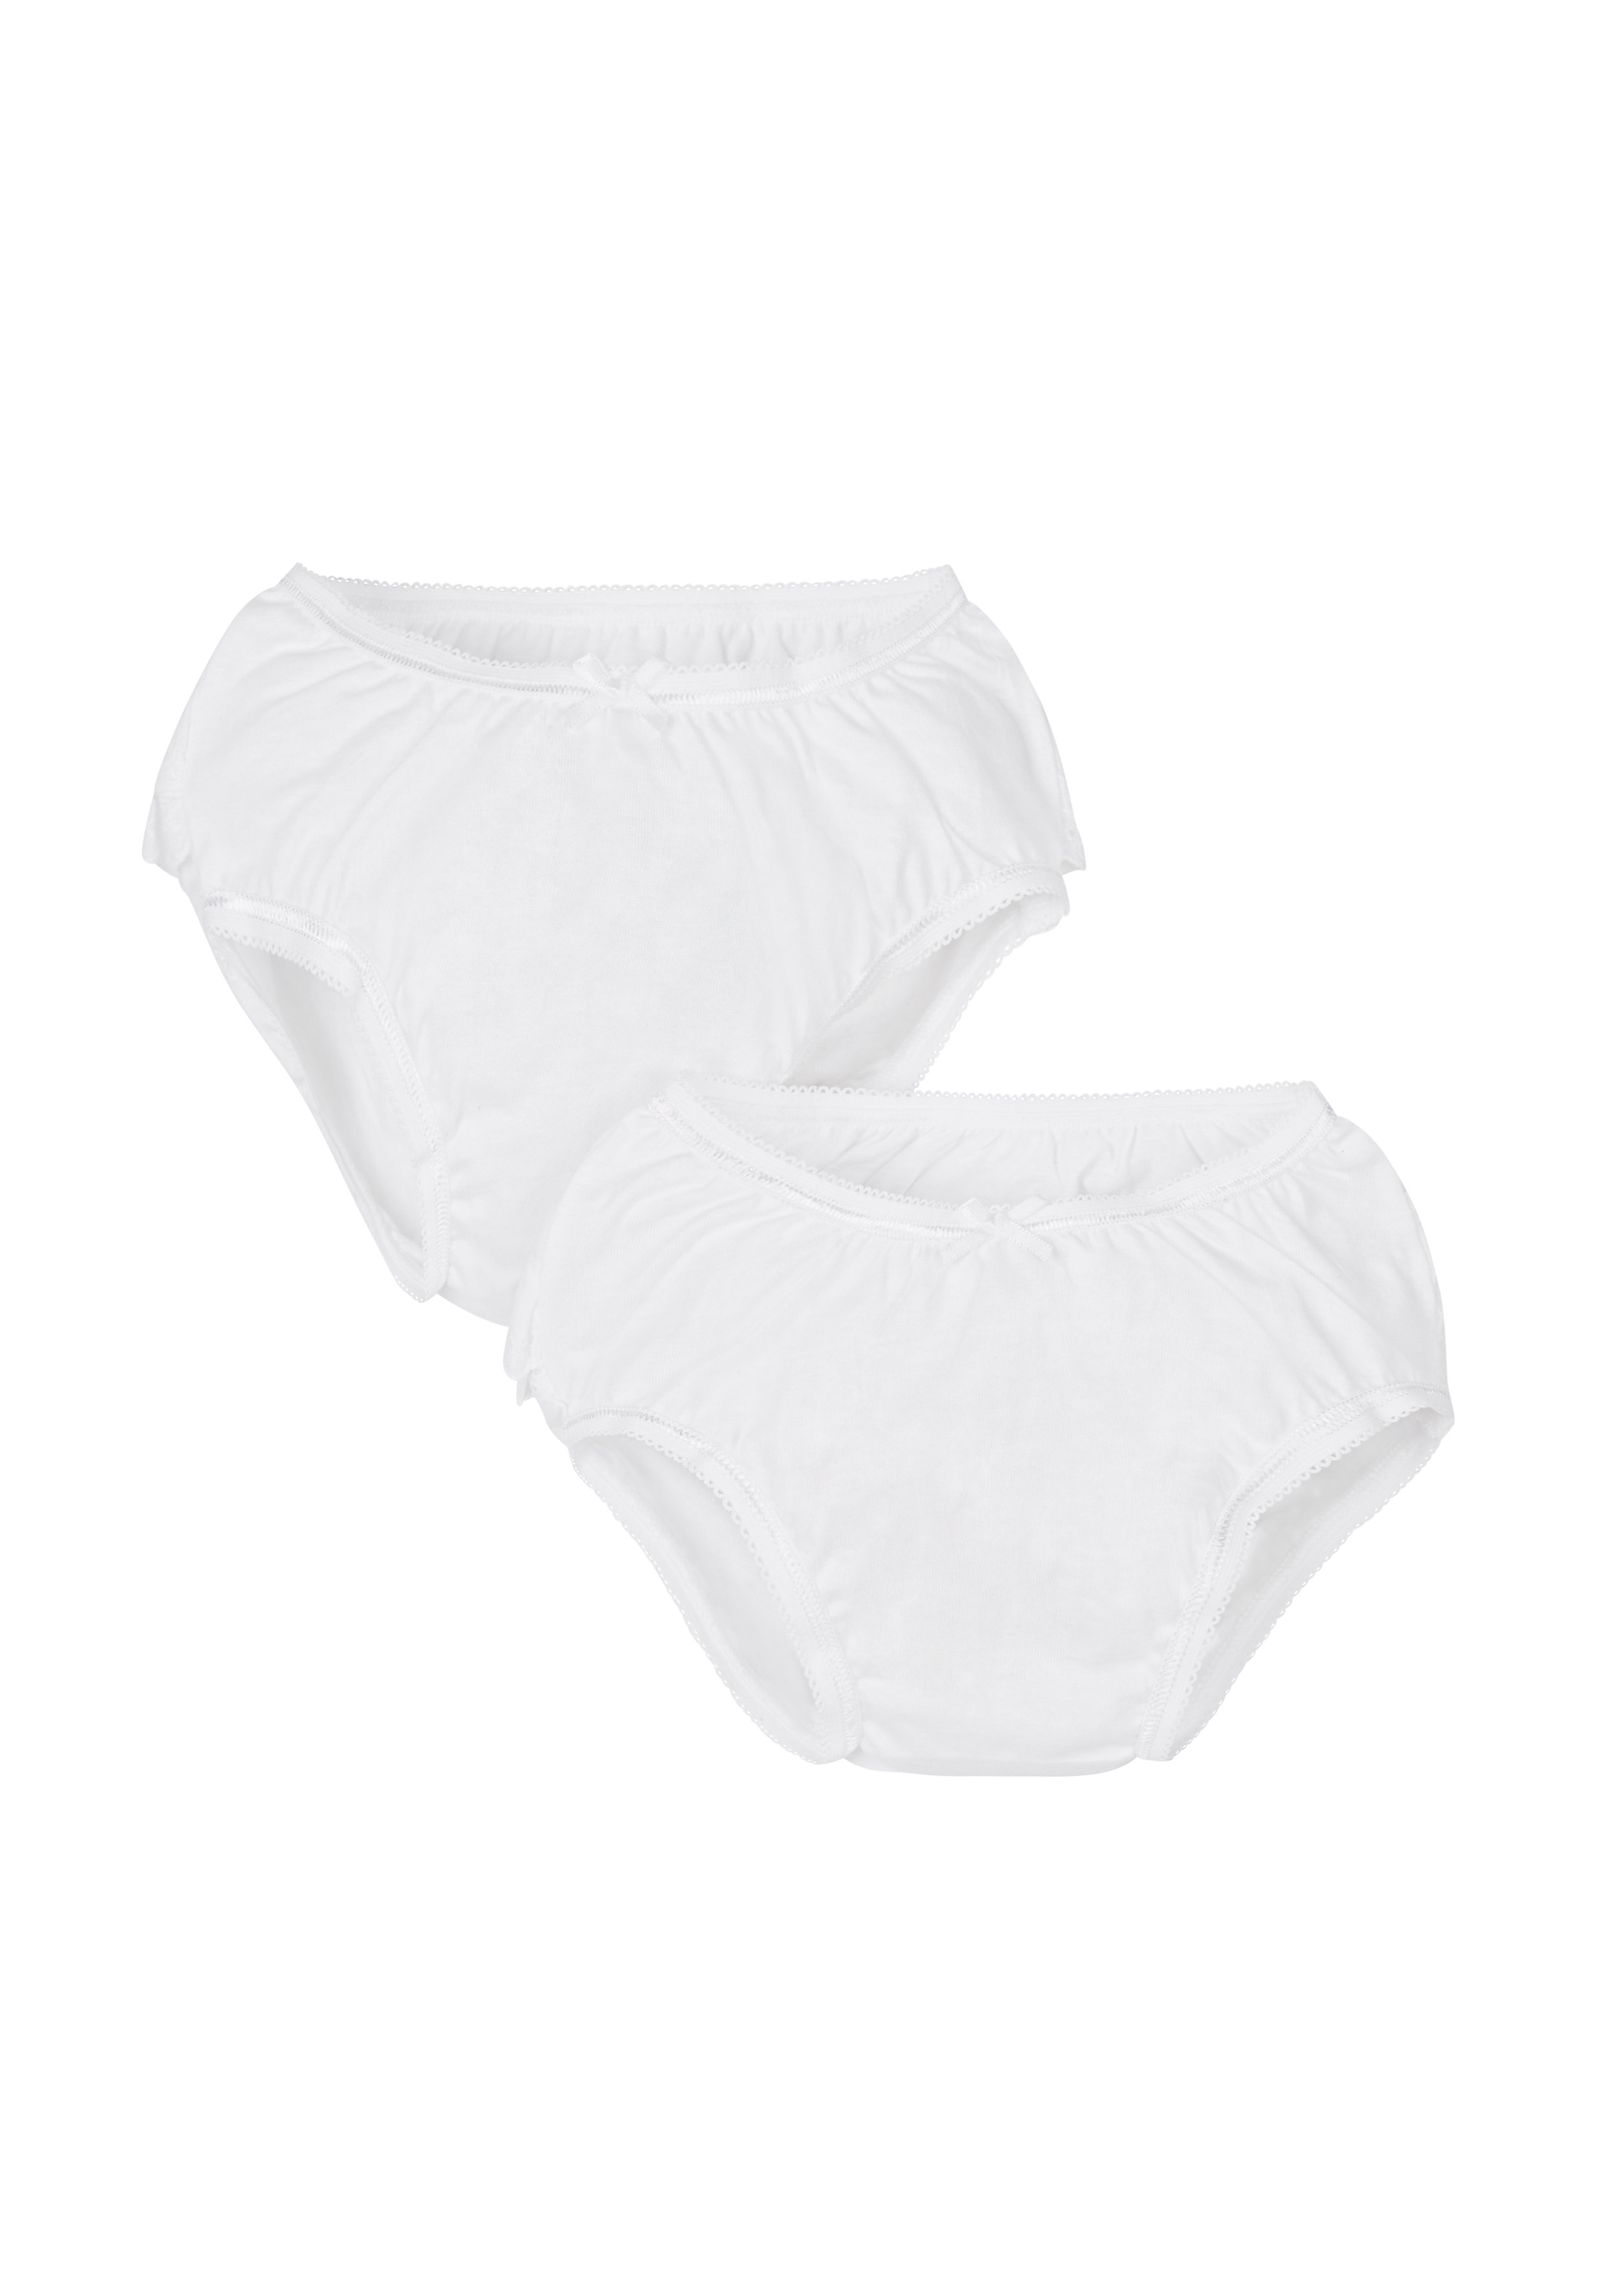 Mothercare | Girls Briefs Frill Detail - Pack Of 2 - White 0